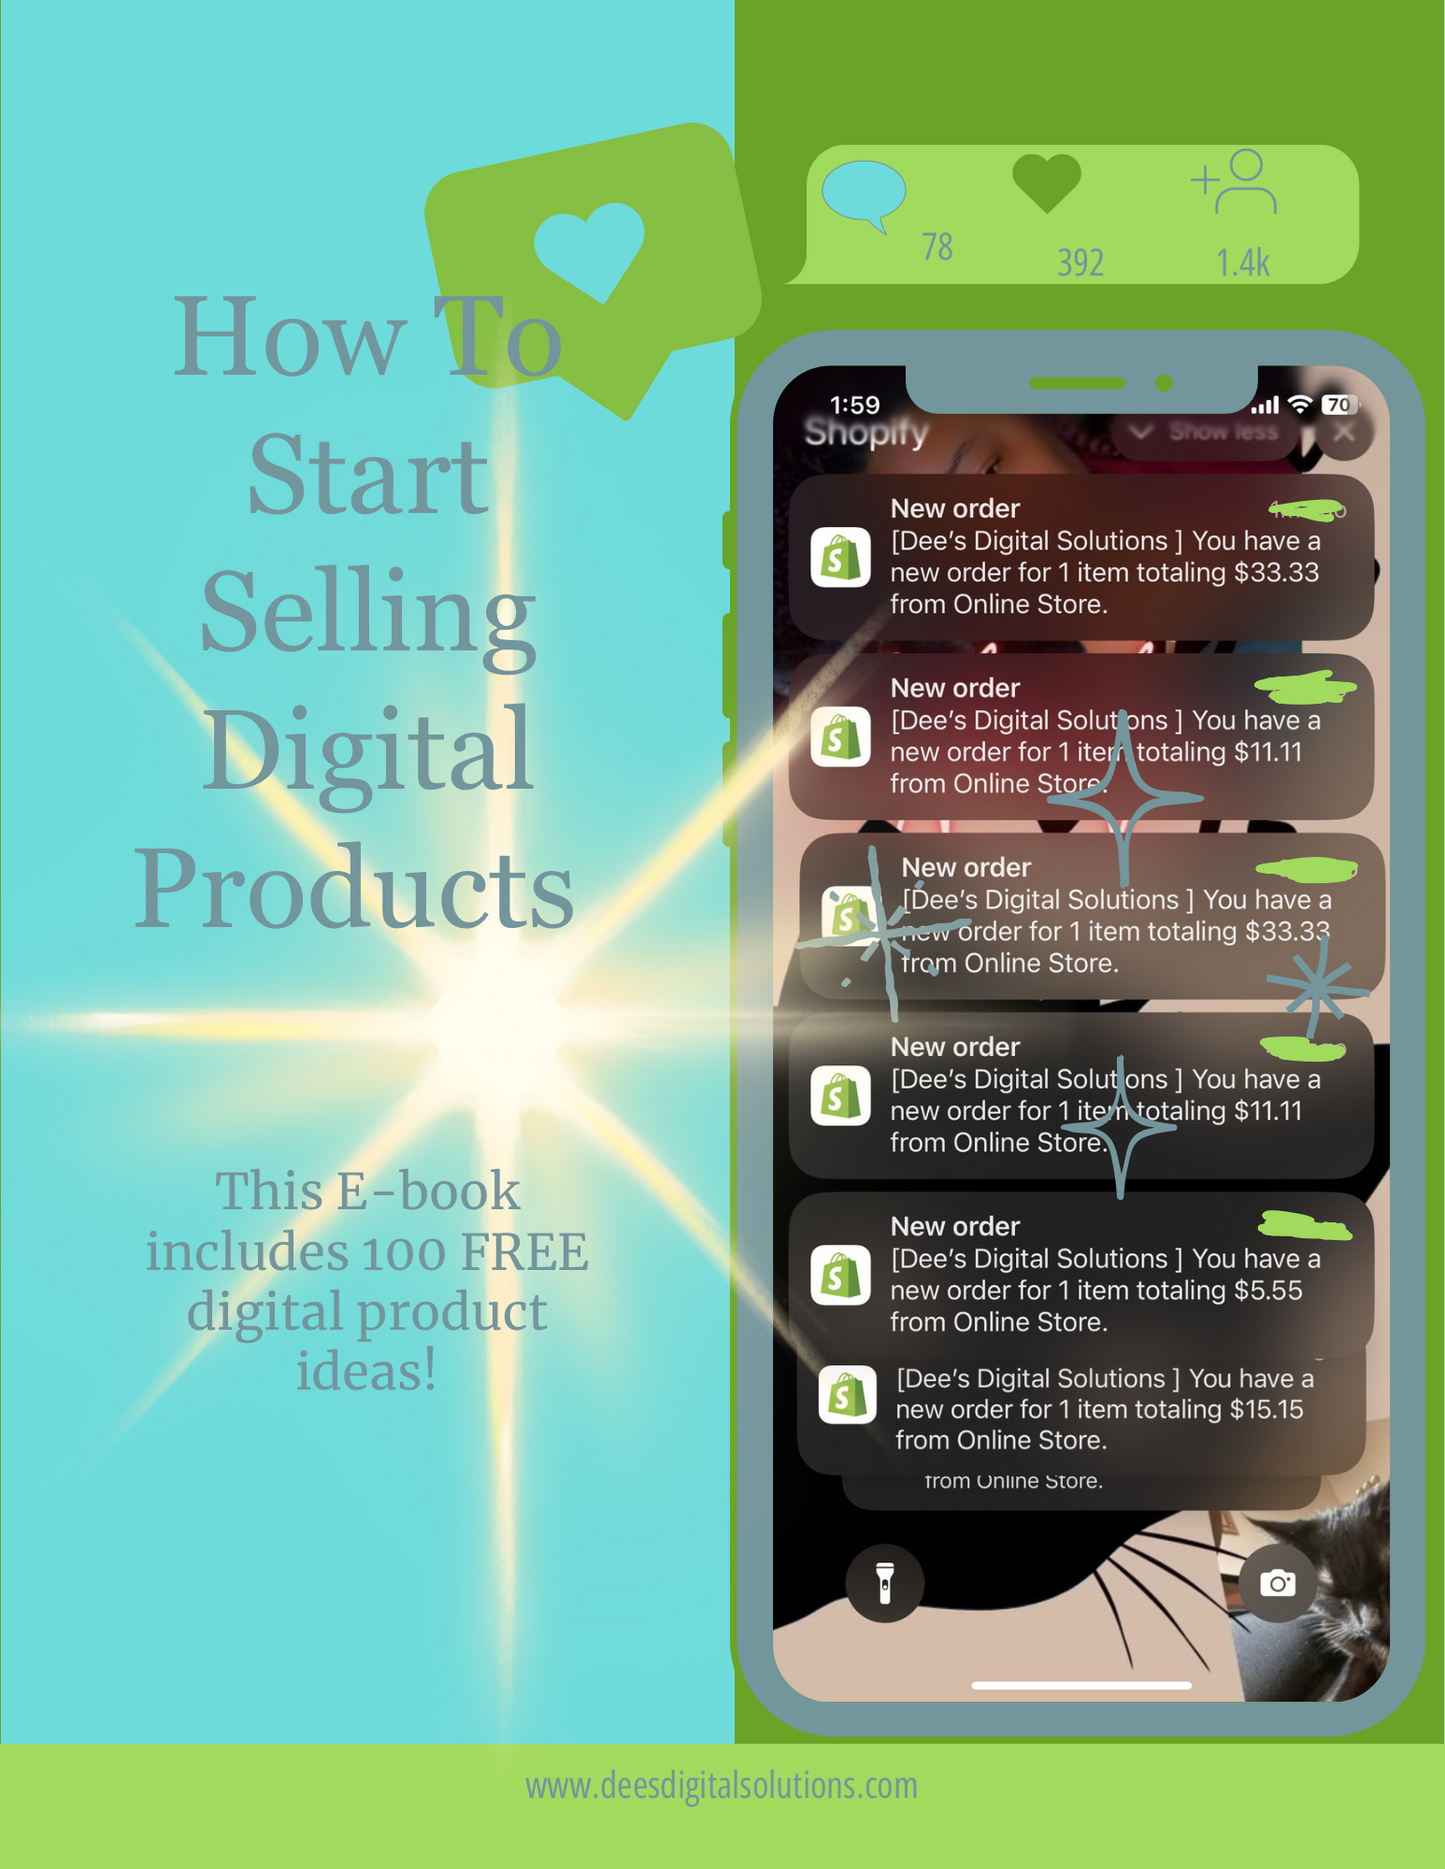 Digital Product Starter Pack: Unlocking Success In the Digital Realm